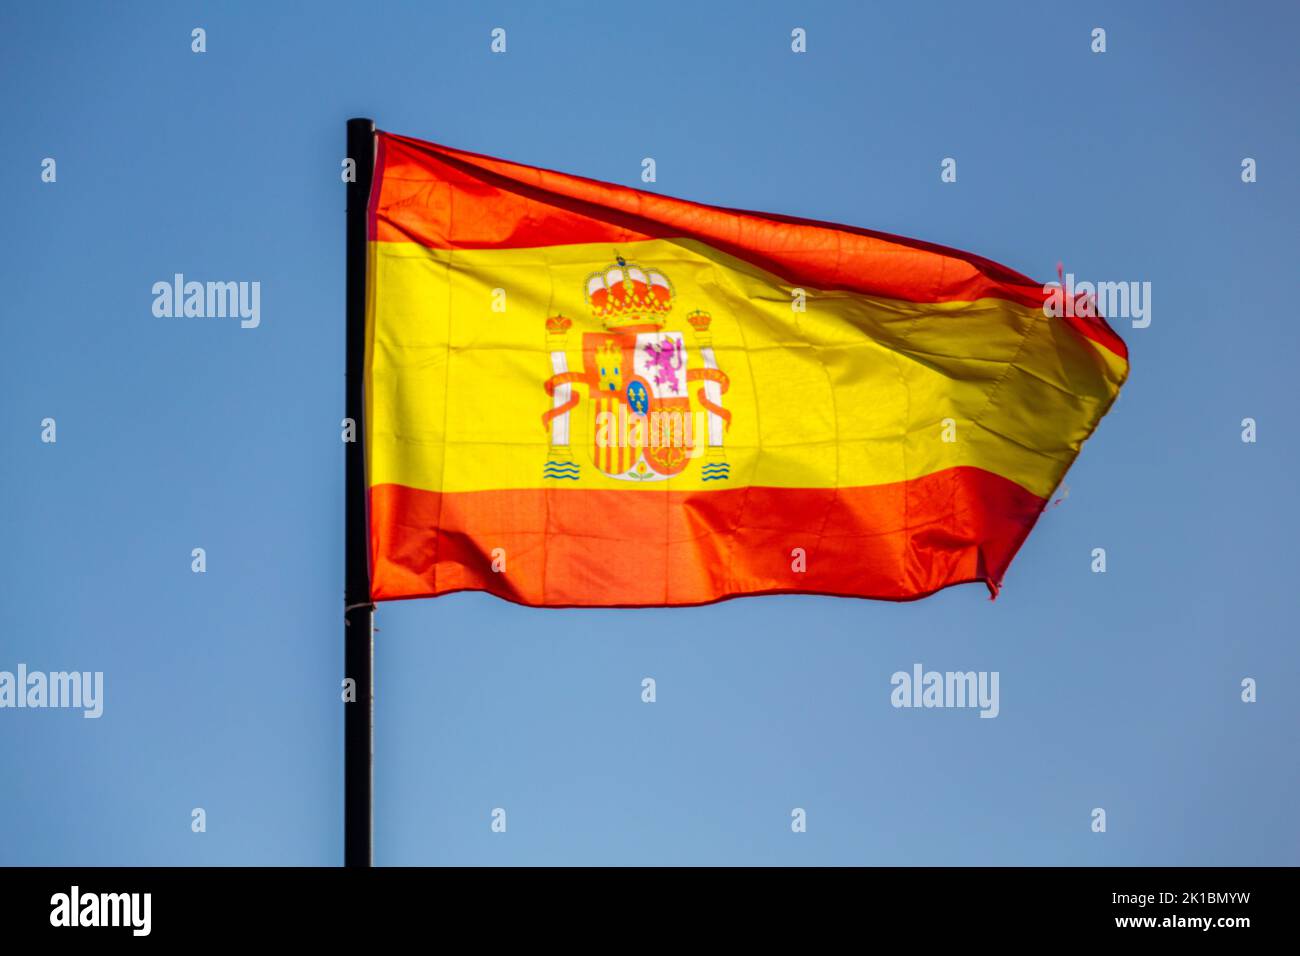 The national flag of Spain waving in a blue sky Stock Photo